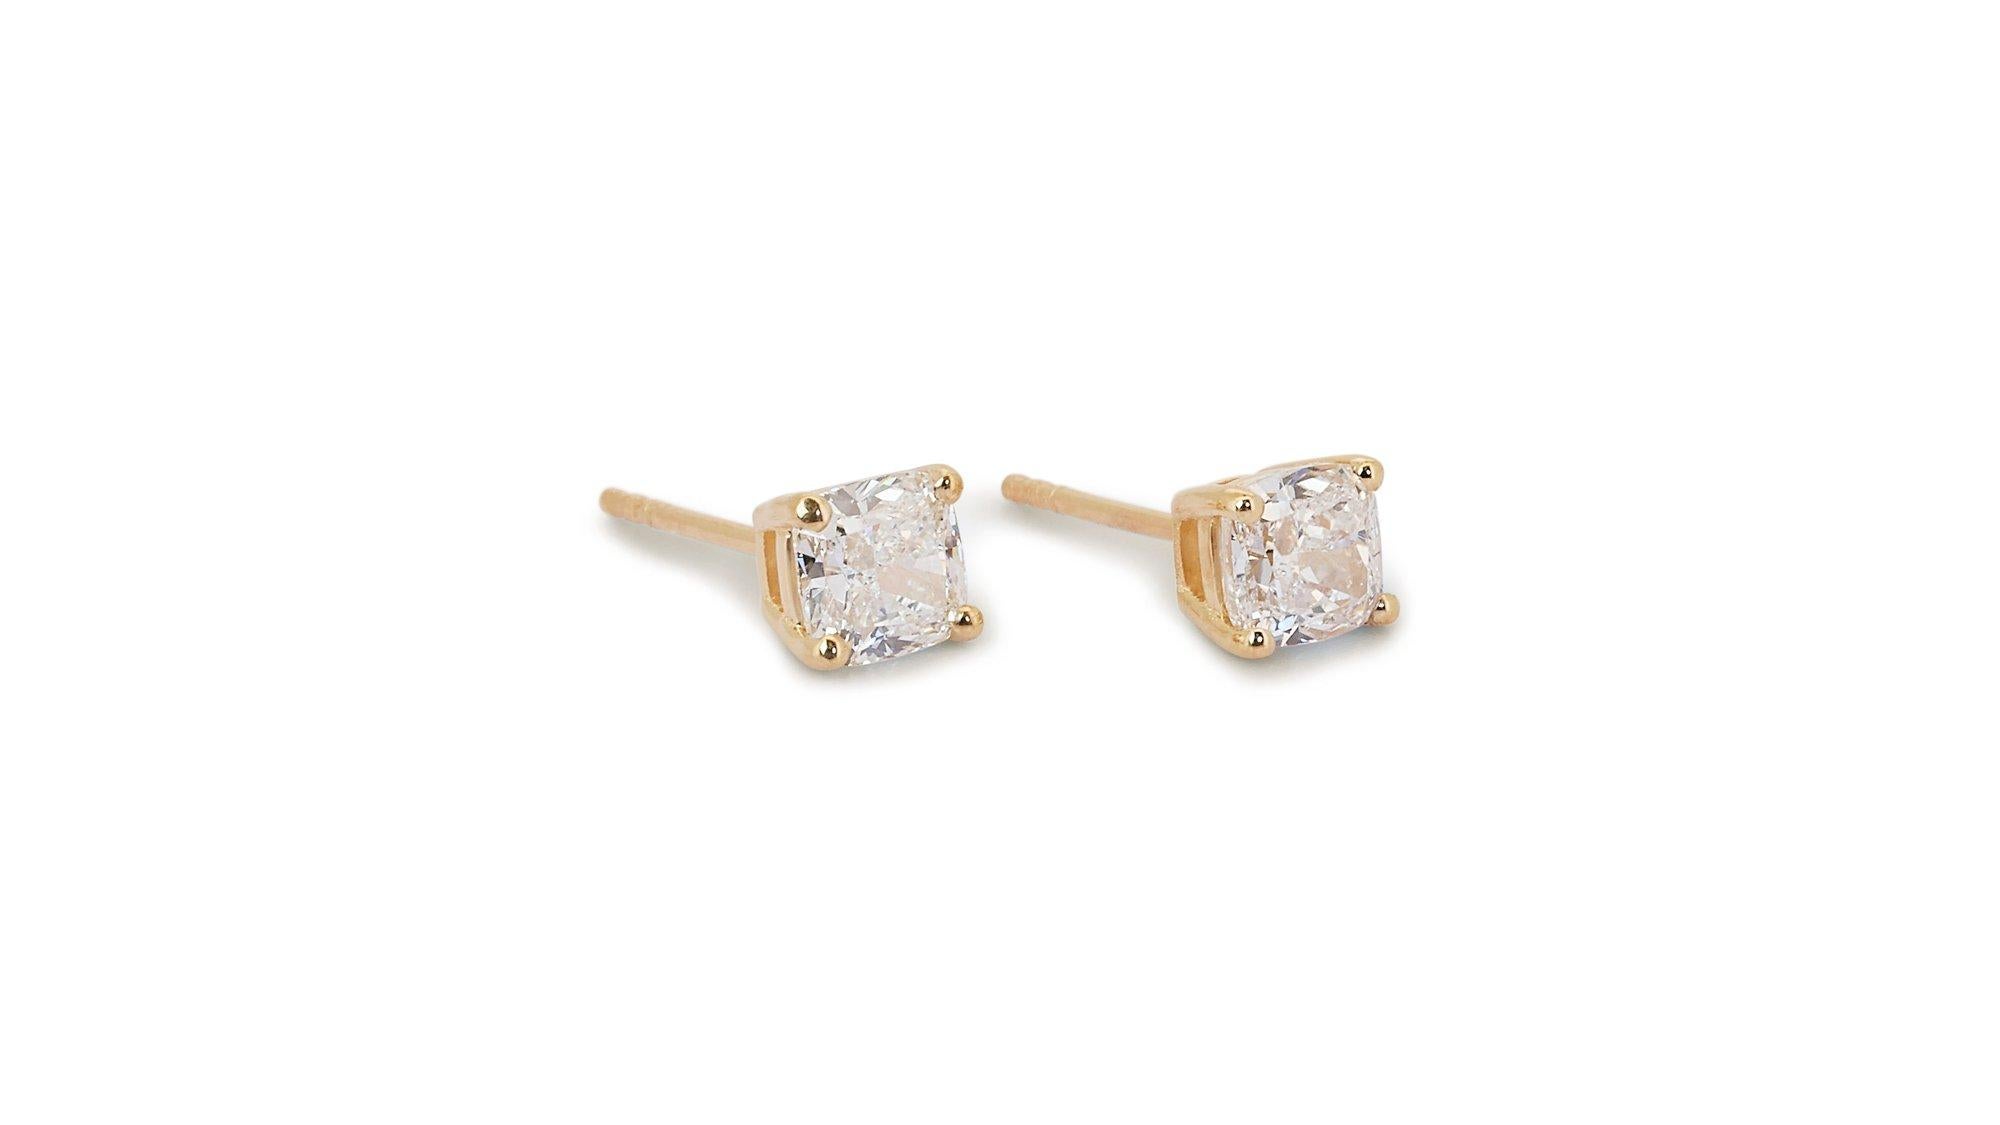 A beautiful pair of classic stud earrings with a dazzling pair of 1.42 carat of cushion diamonds in H VS1-VS2. The jewelry is made of 18K yellow gold with a high quality polish. It comes with AIG certificate and a fancy jewelry box.

2 diamond main